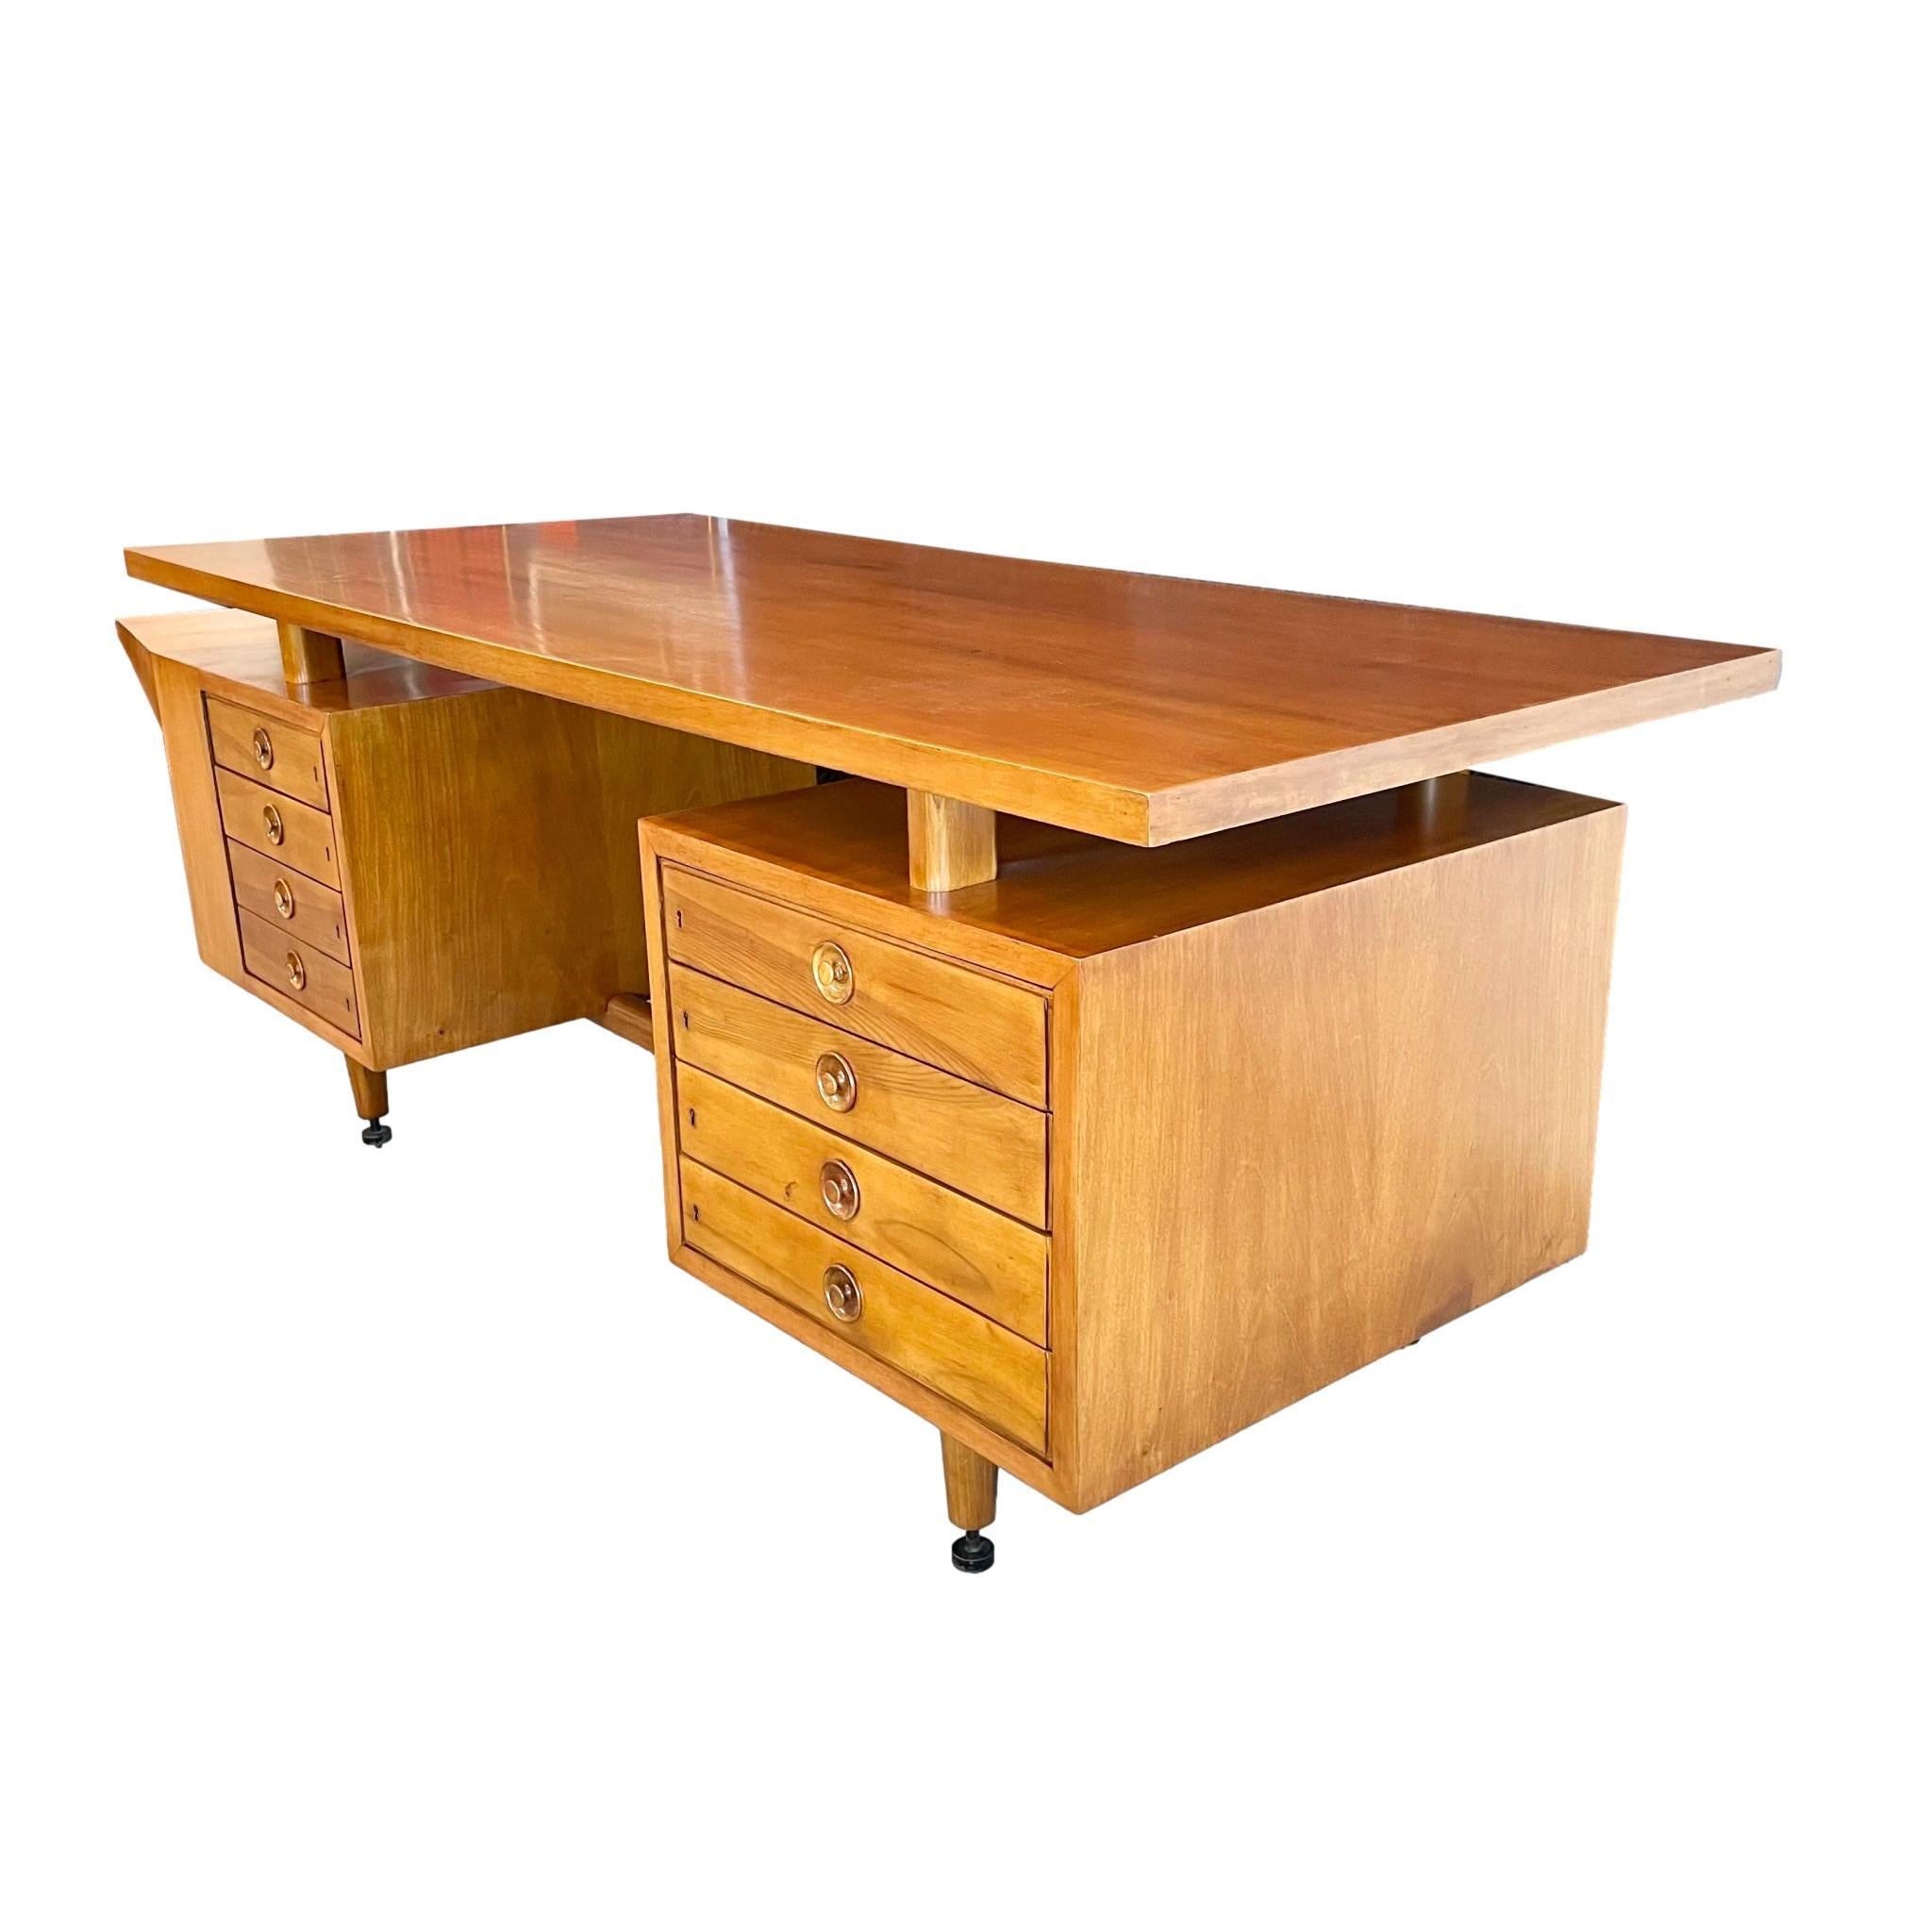 Mid-20th Century Melchiorre Bega Desk, 1950s Italy For Sale